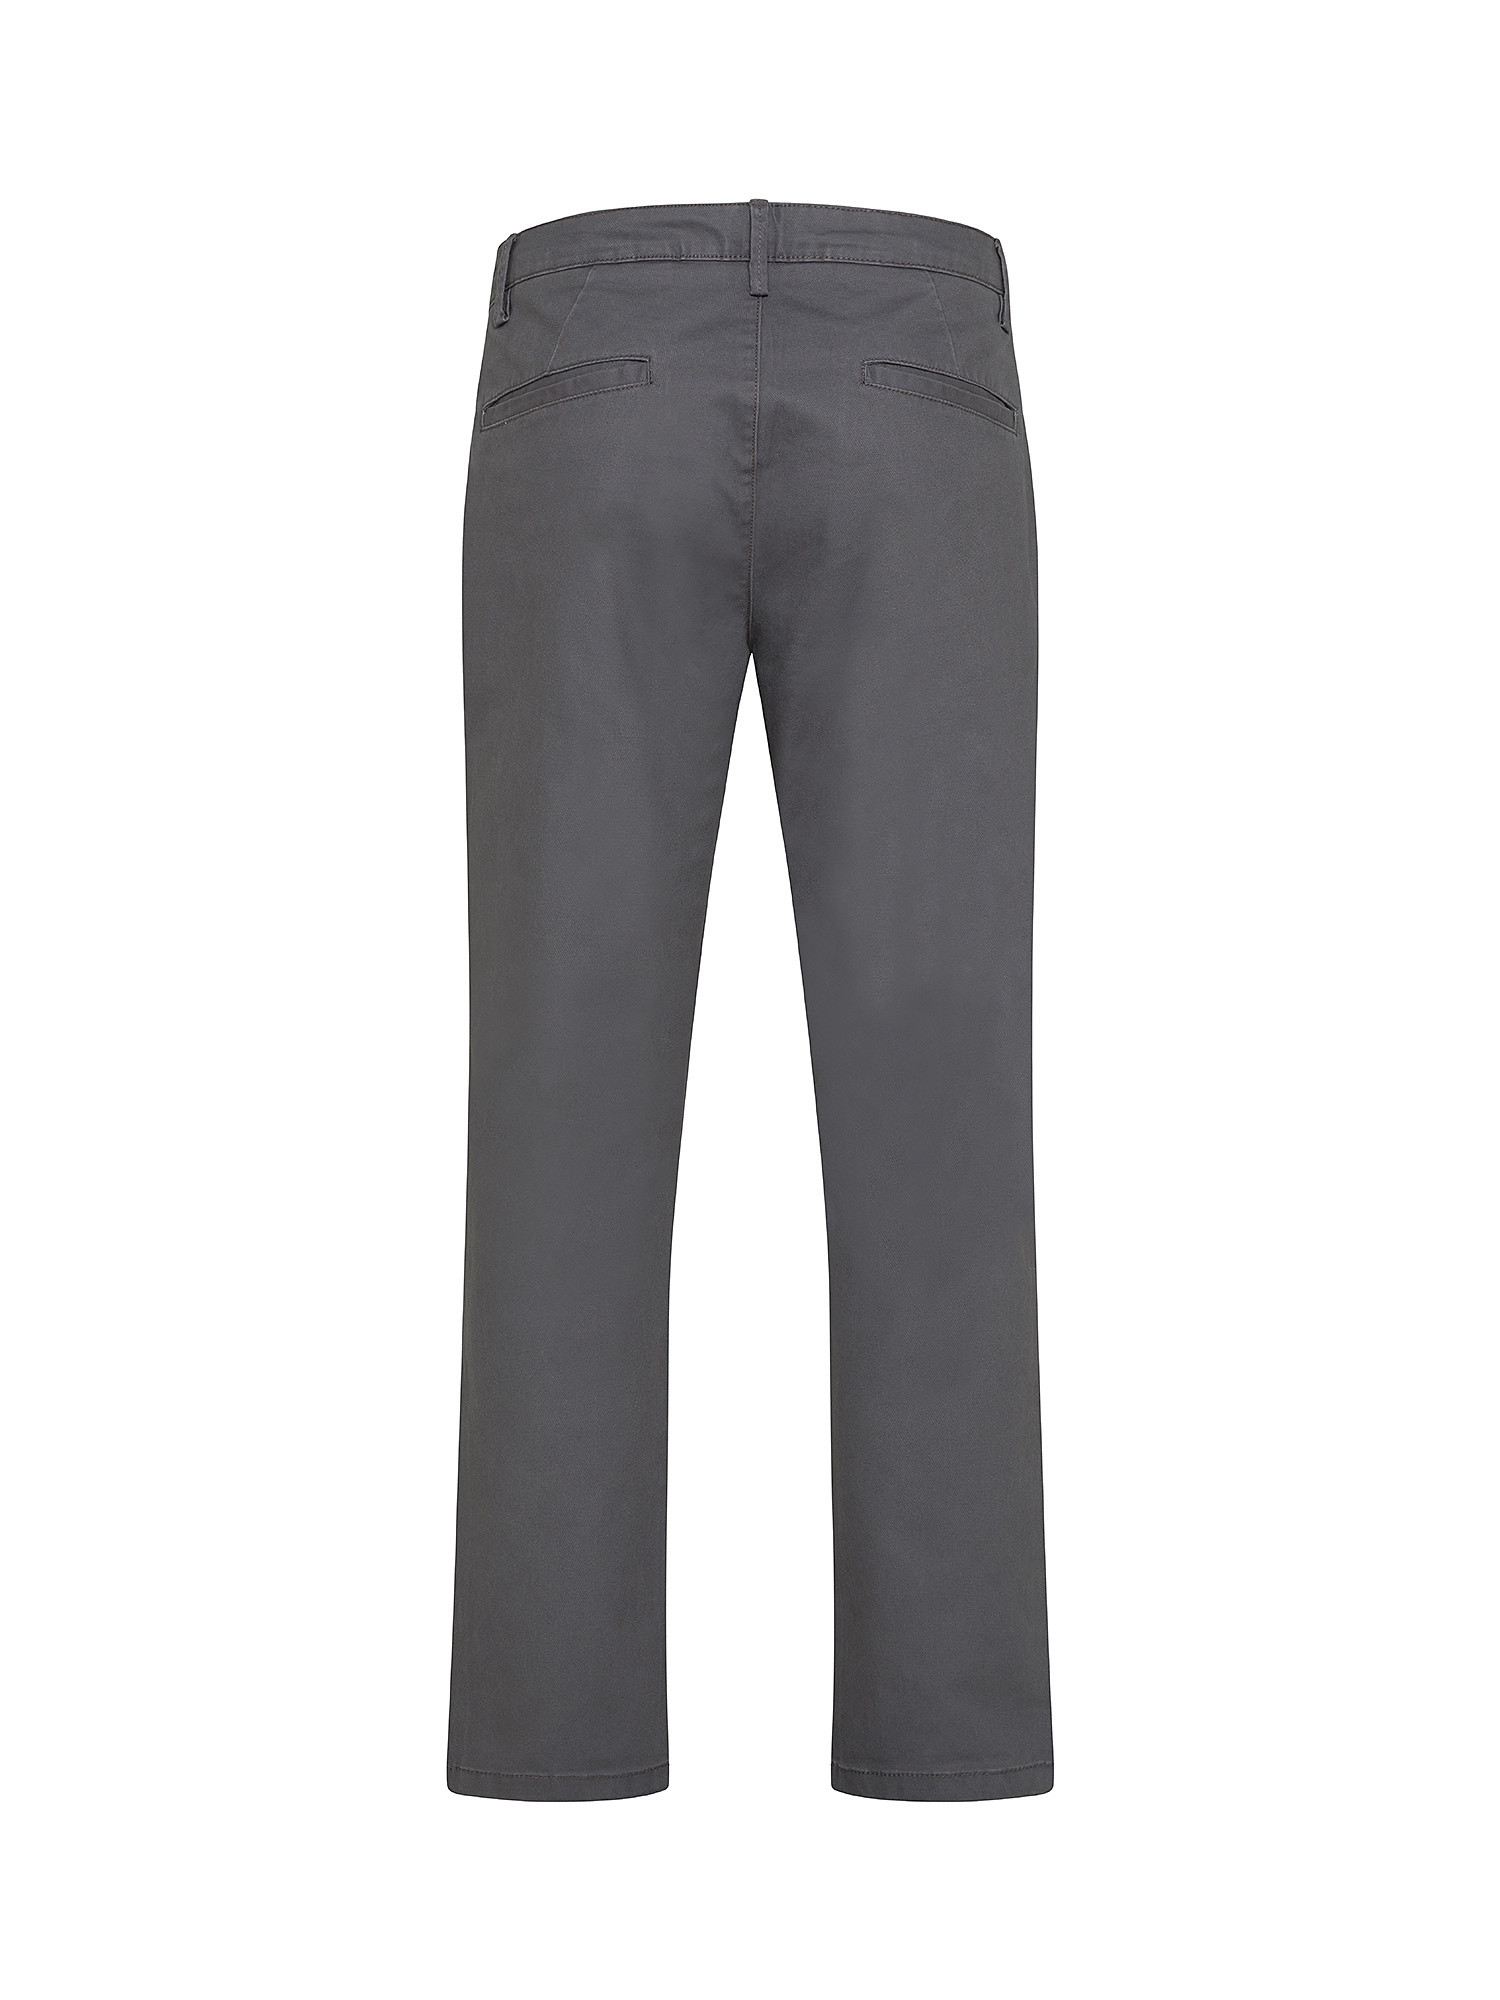 JCT - Pantaloni chino con coulisse, Grigio, large image number 1